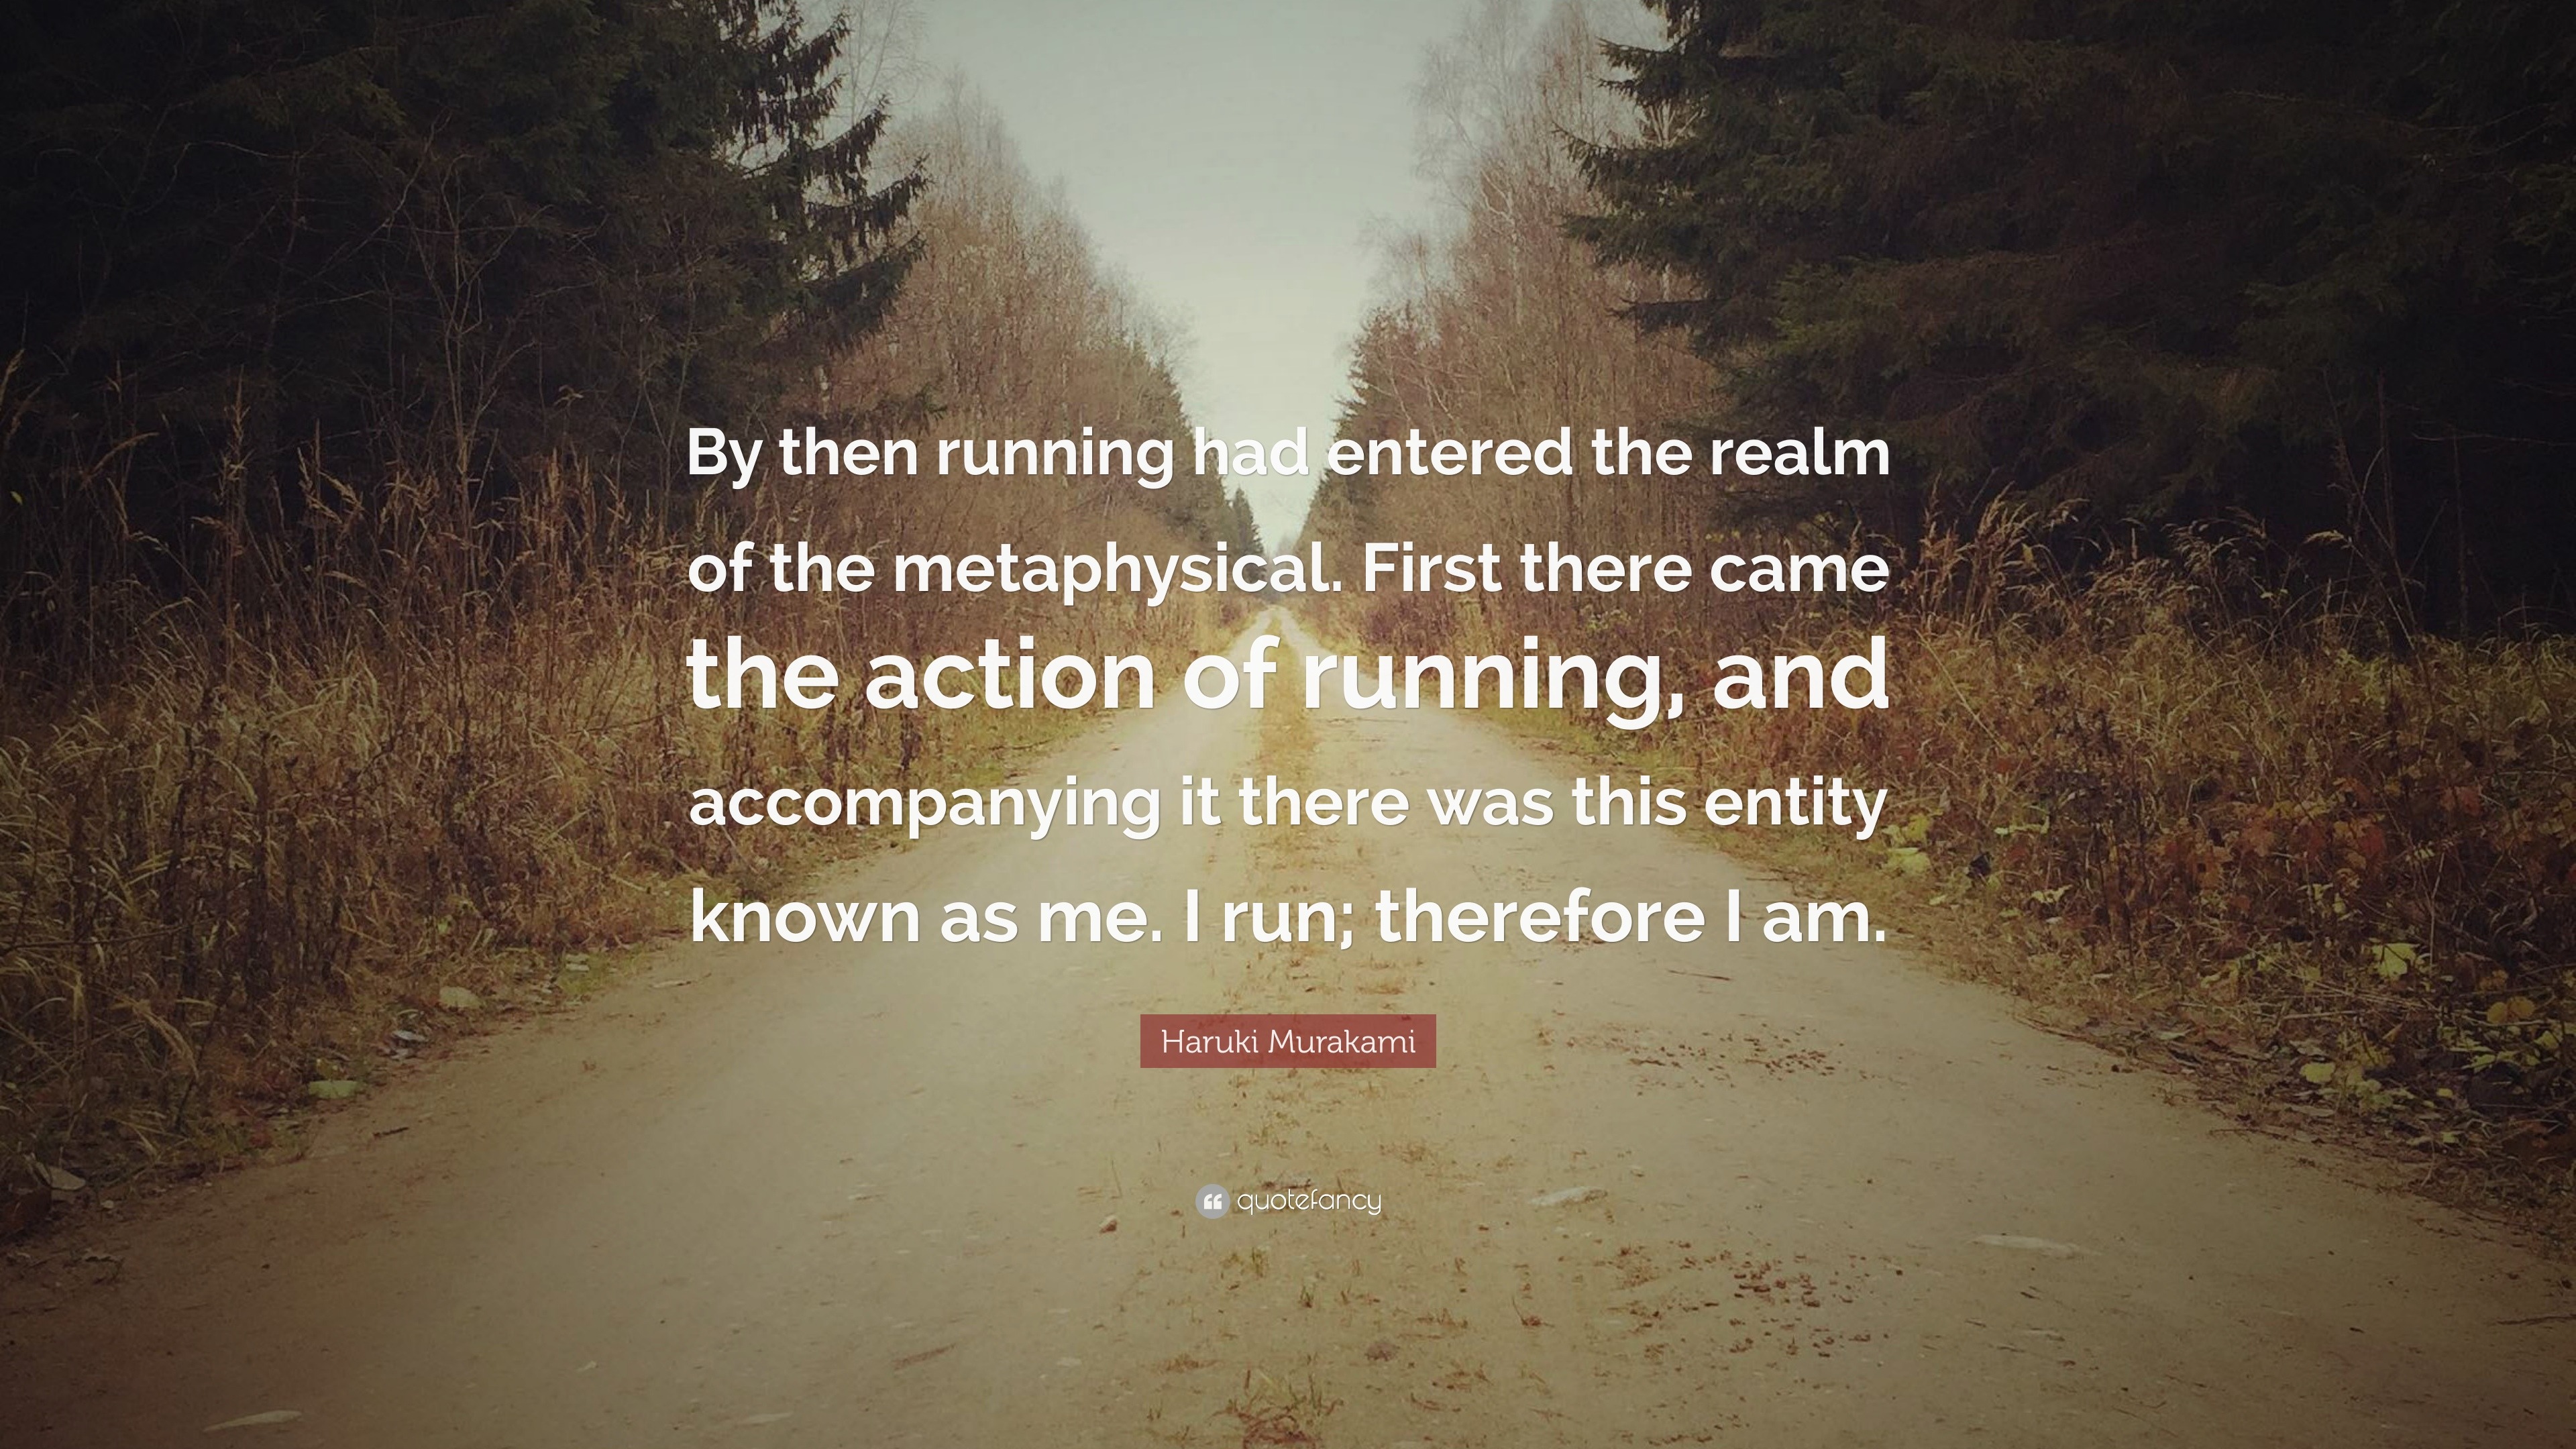 Haruki Murakami Quote By Then Running Had Entered The Realm Of The Metaphysical First There Came The Action Of Running And Accompanying It T 9 Wallpapers Quotefancy